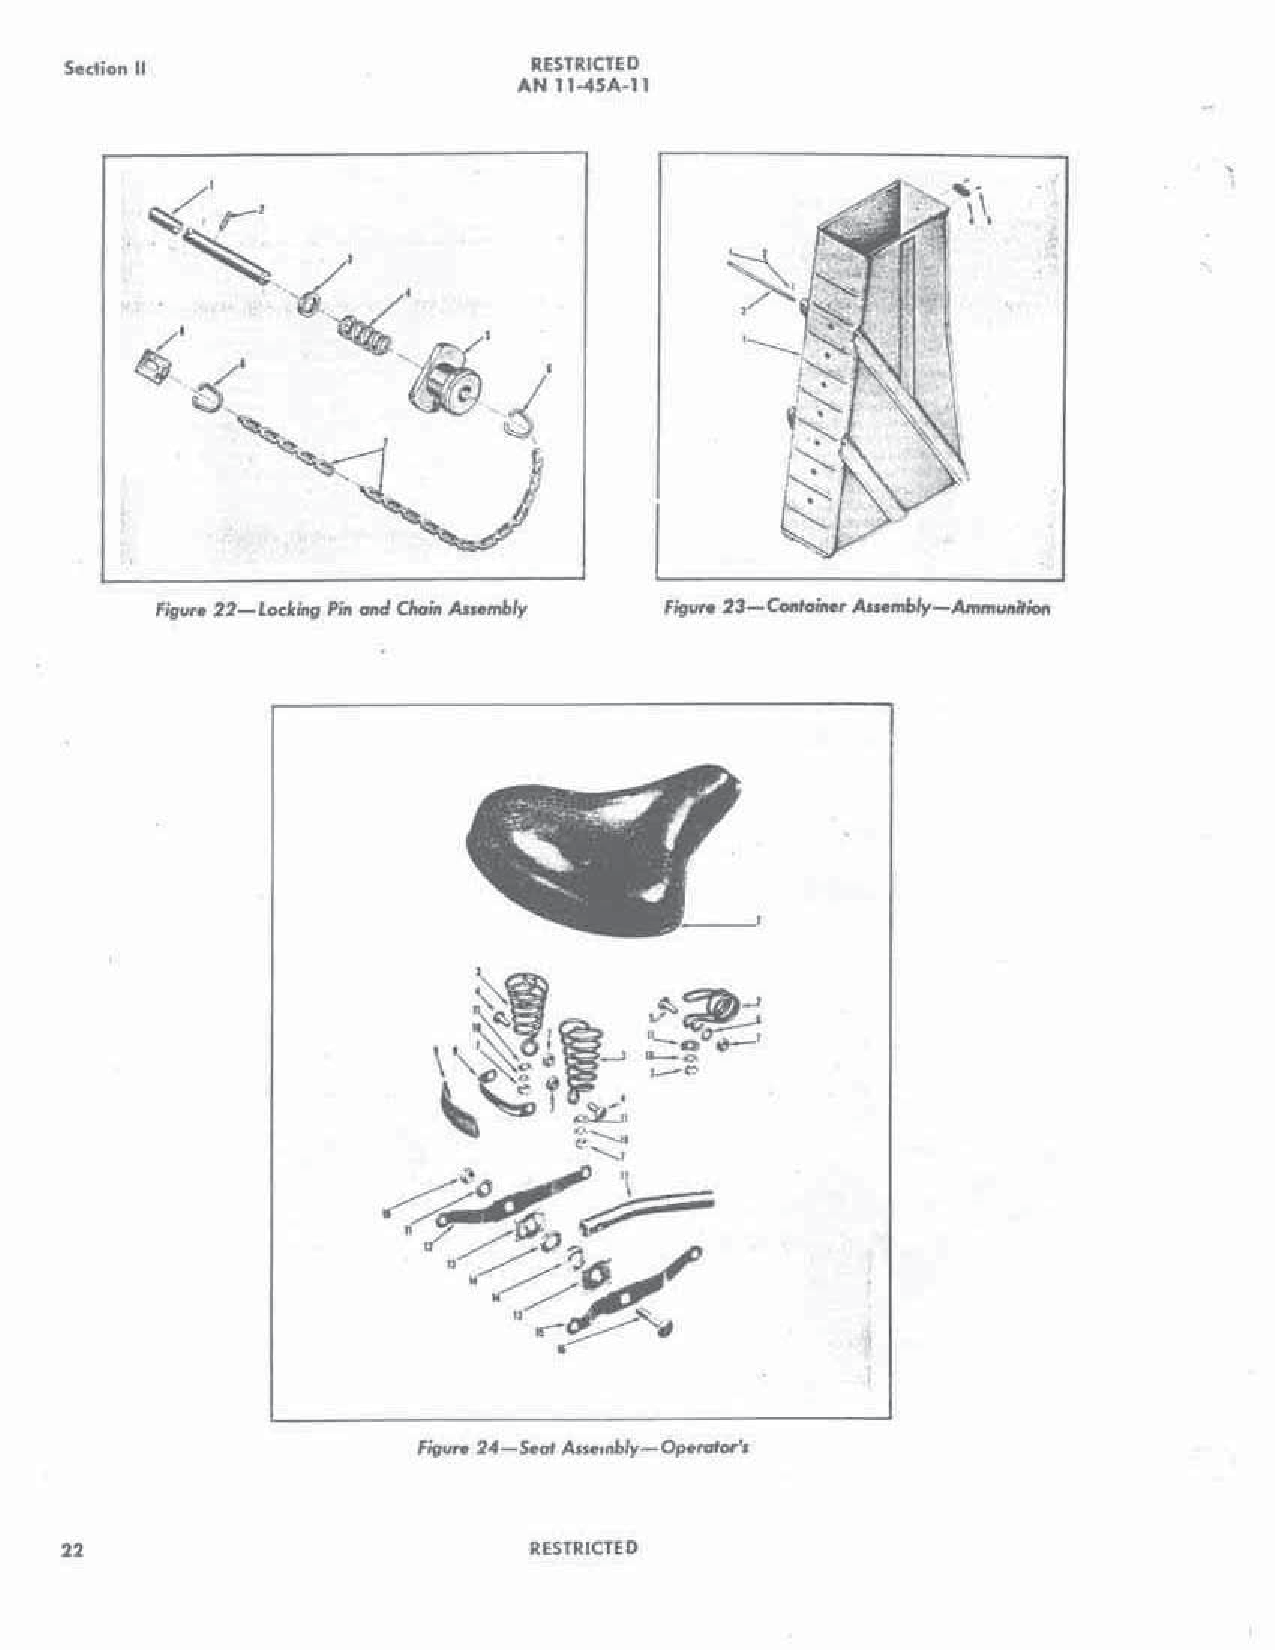 Sample page 26 from AirCorps Library document: Turret Parts Catalog - Army A-9B, Navy 250CE-4